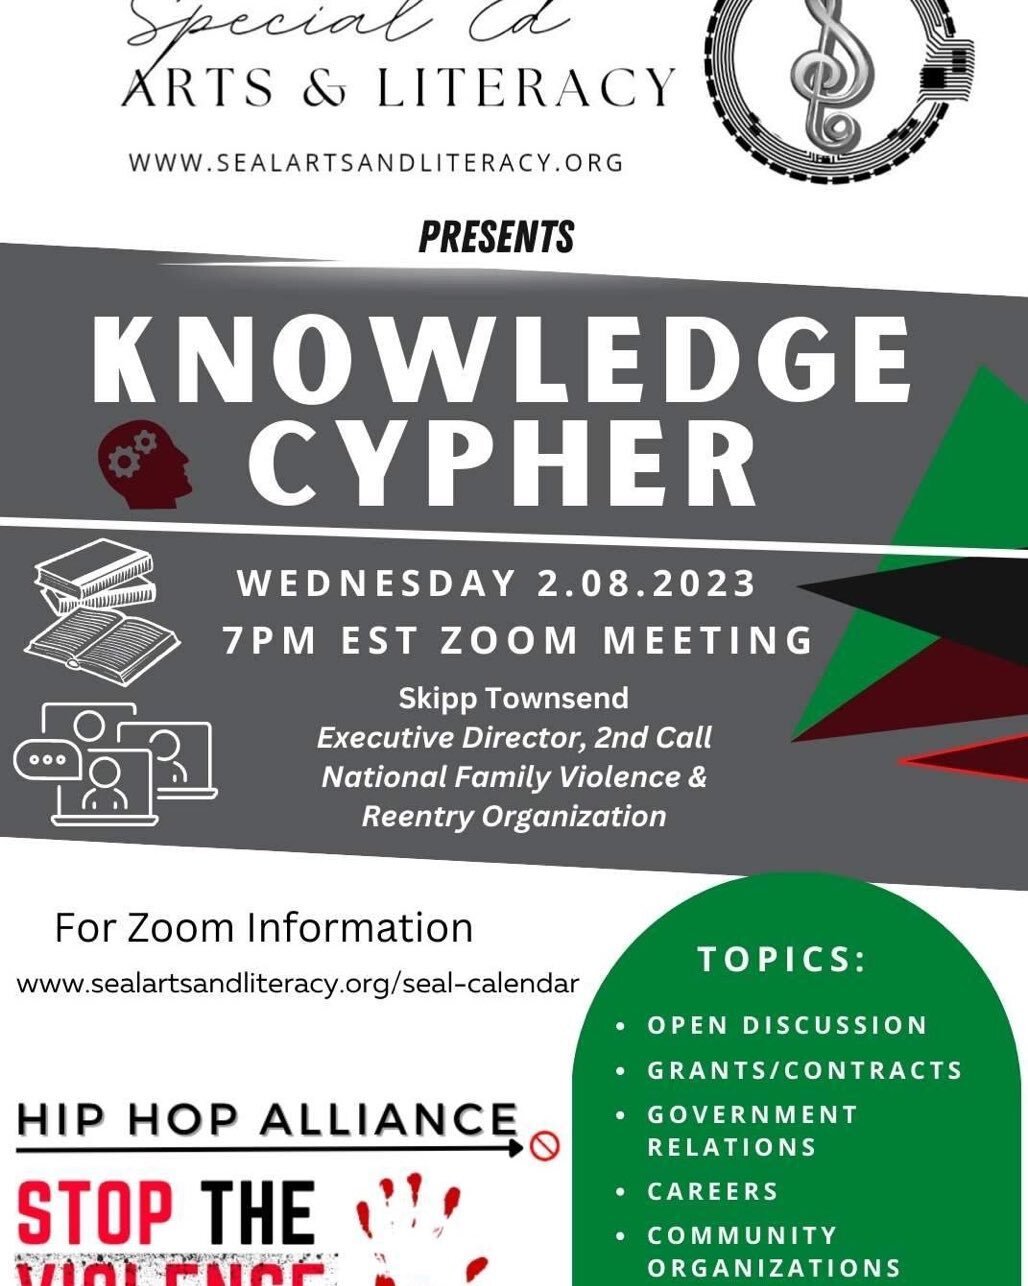 Don&rsquo;t forget !!! TODAY @ 7PM. Zoom Knowledge Cypher
Skipp Townsend
#governmentcontracts 
#governmentgrants 
#careers
#communityoutreach 
#SEAL
#HHA
#stoptheviolence

Join Zoom Meeting

https://us06web.zoom.us/j/85050843219?pwd=Q05PUlBPSmcxVDd1V